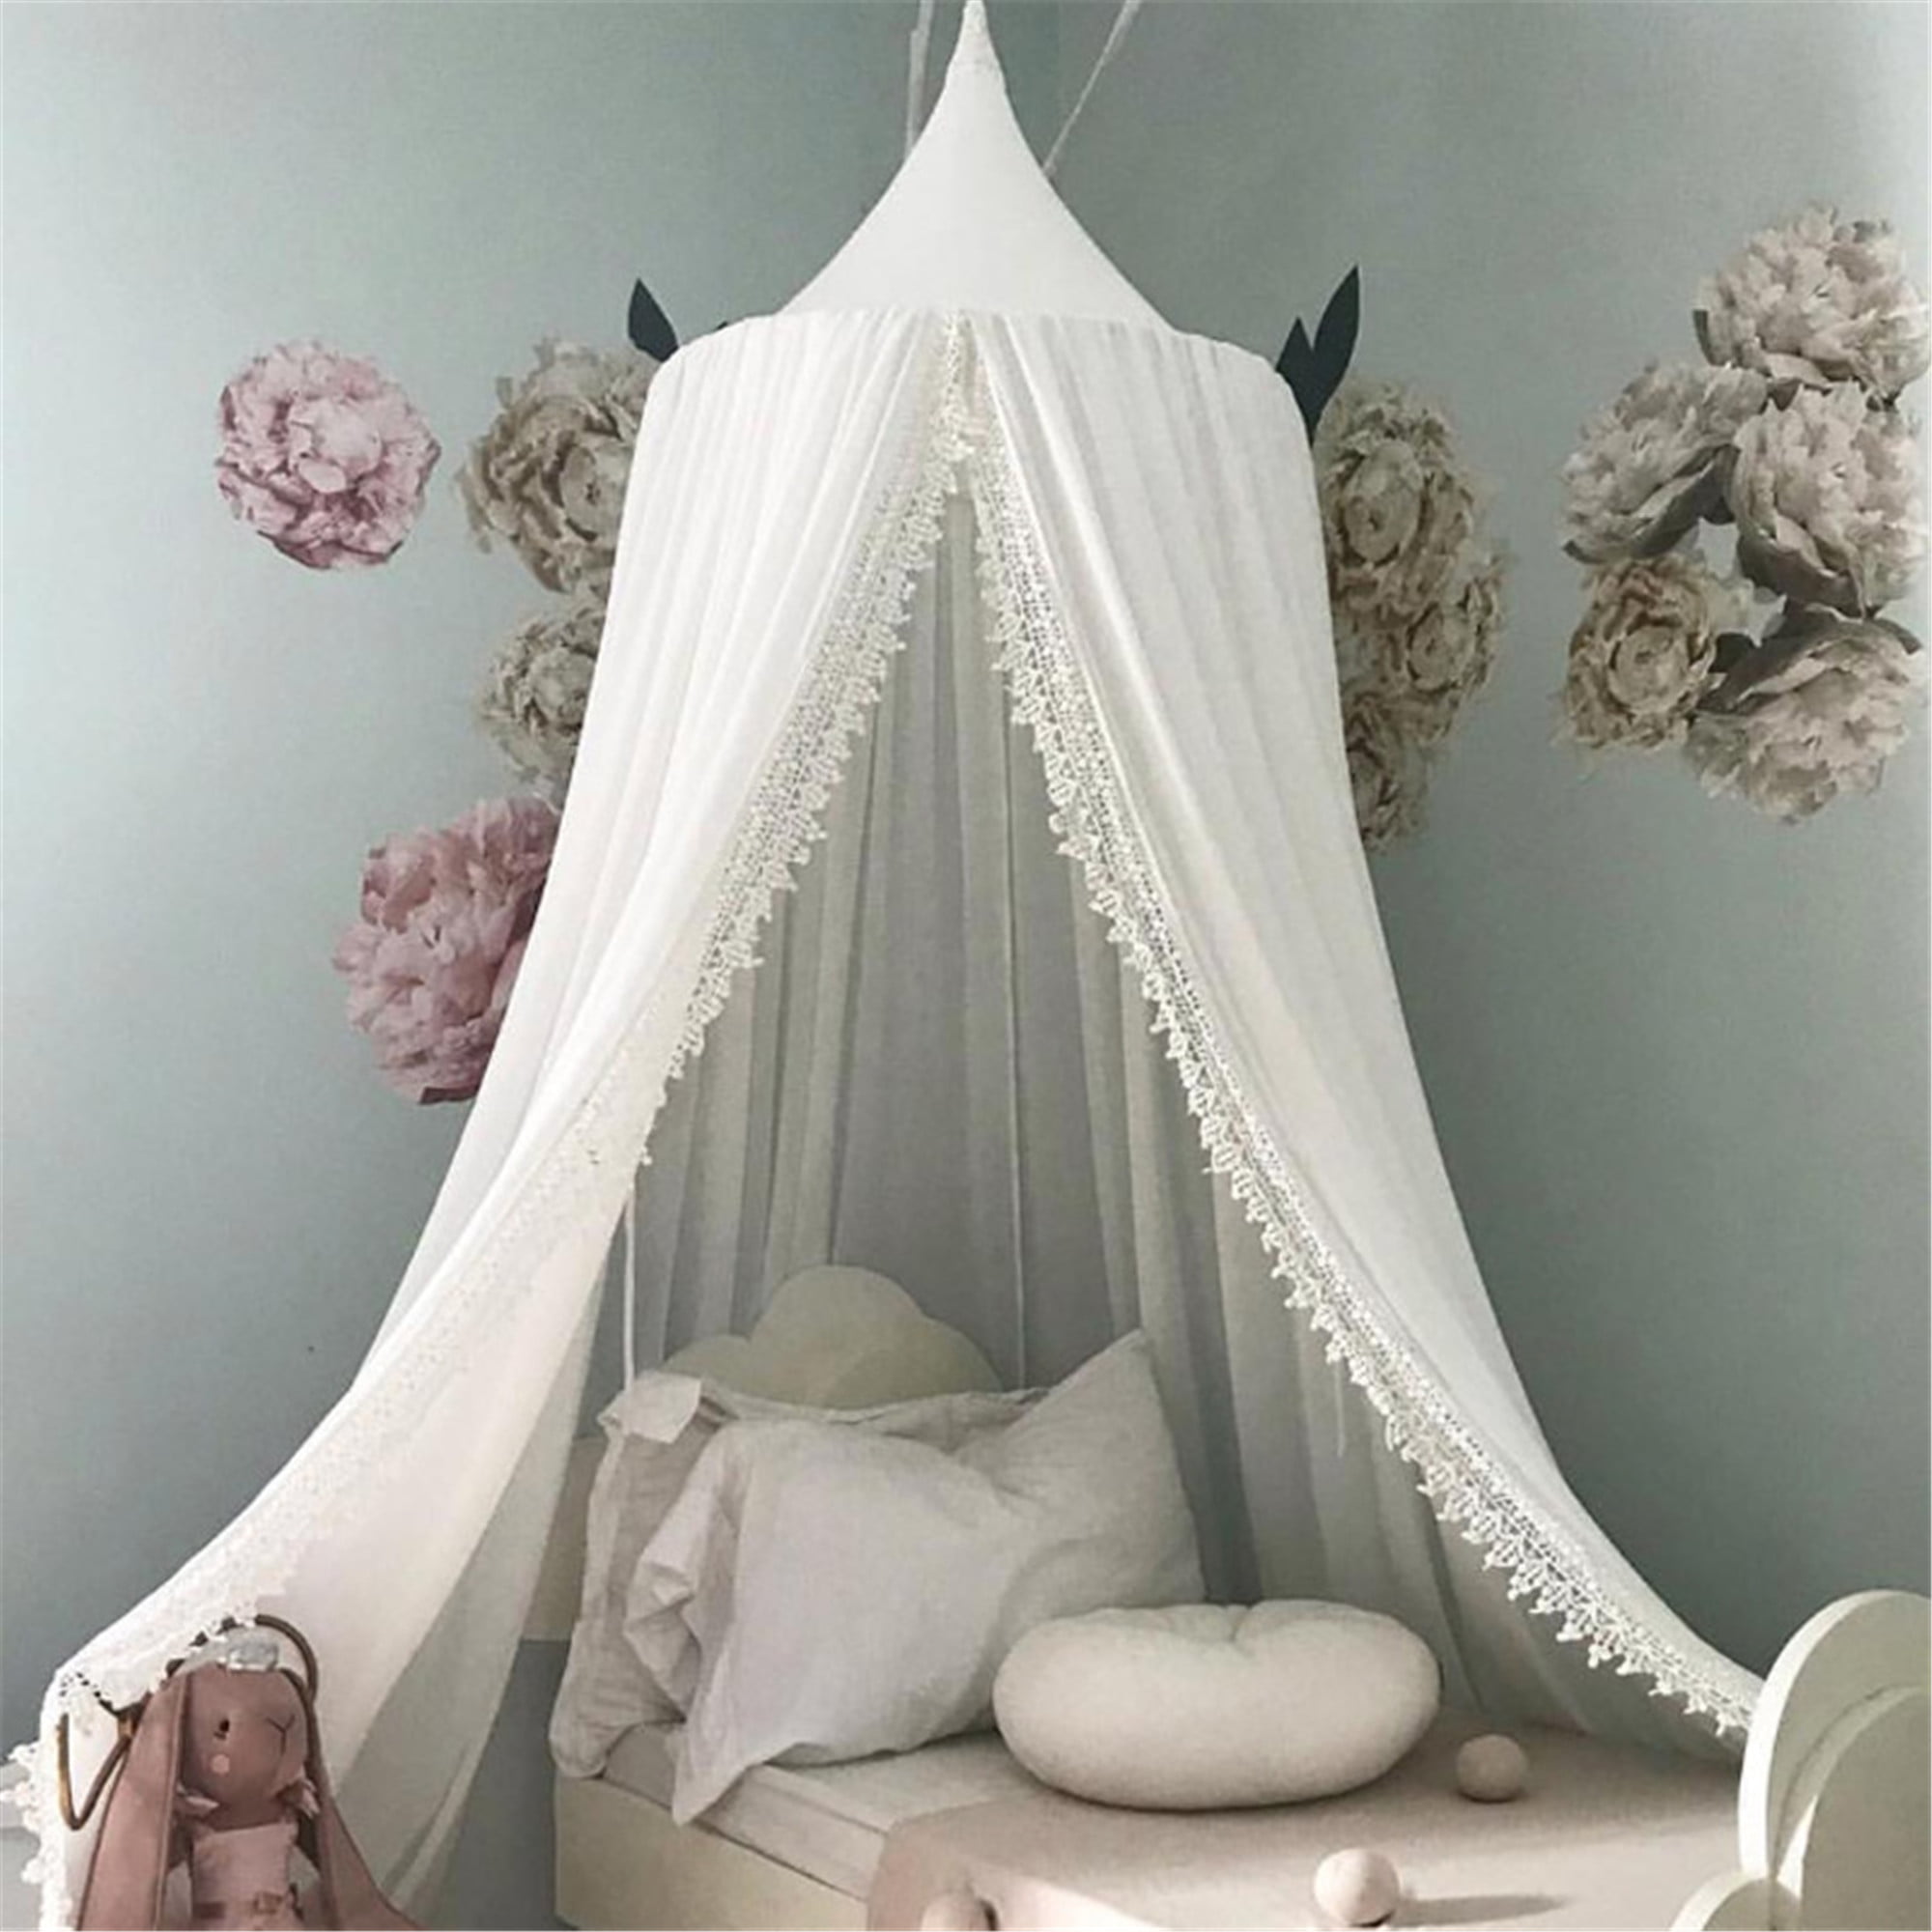 Kids Playhouse Bed Canopy Tent w/Mosquito Netting Hanging Bedding Reading Corner 